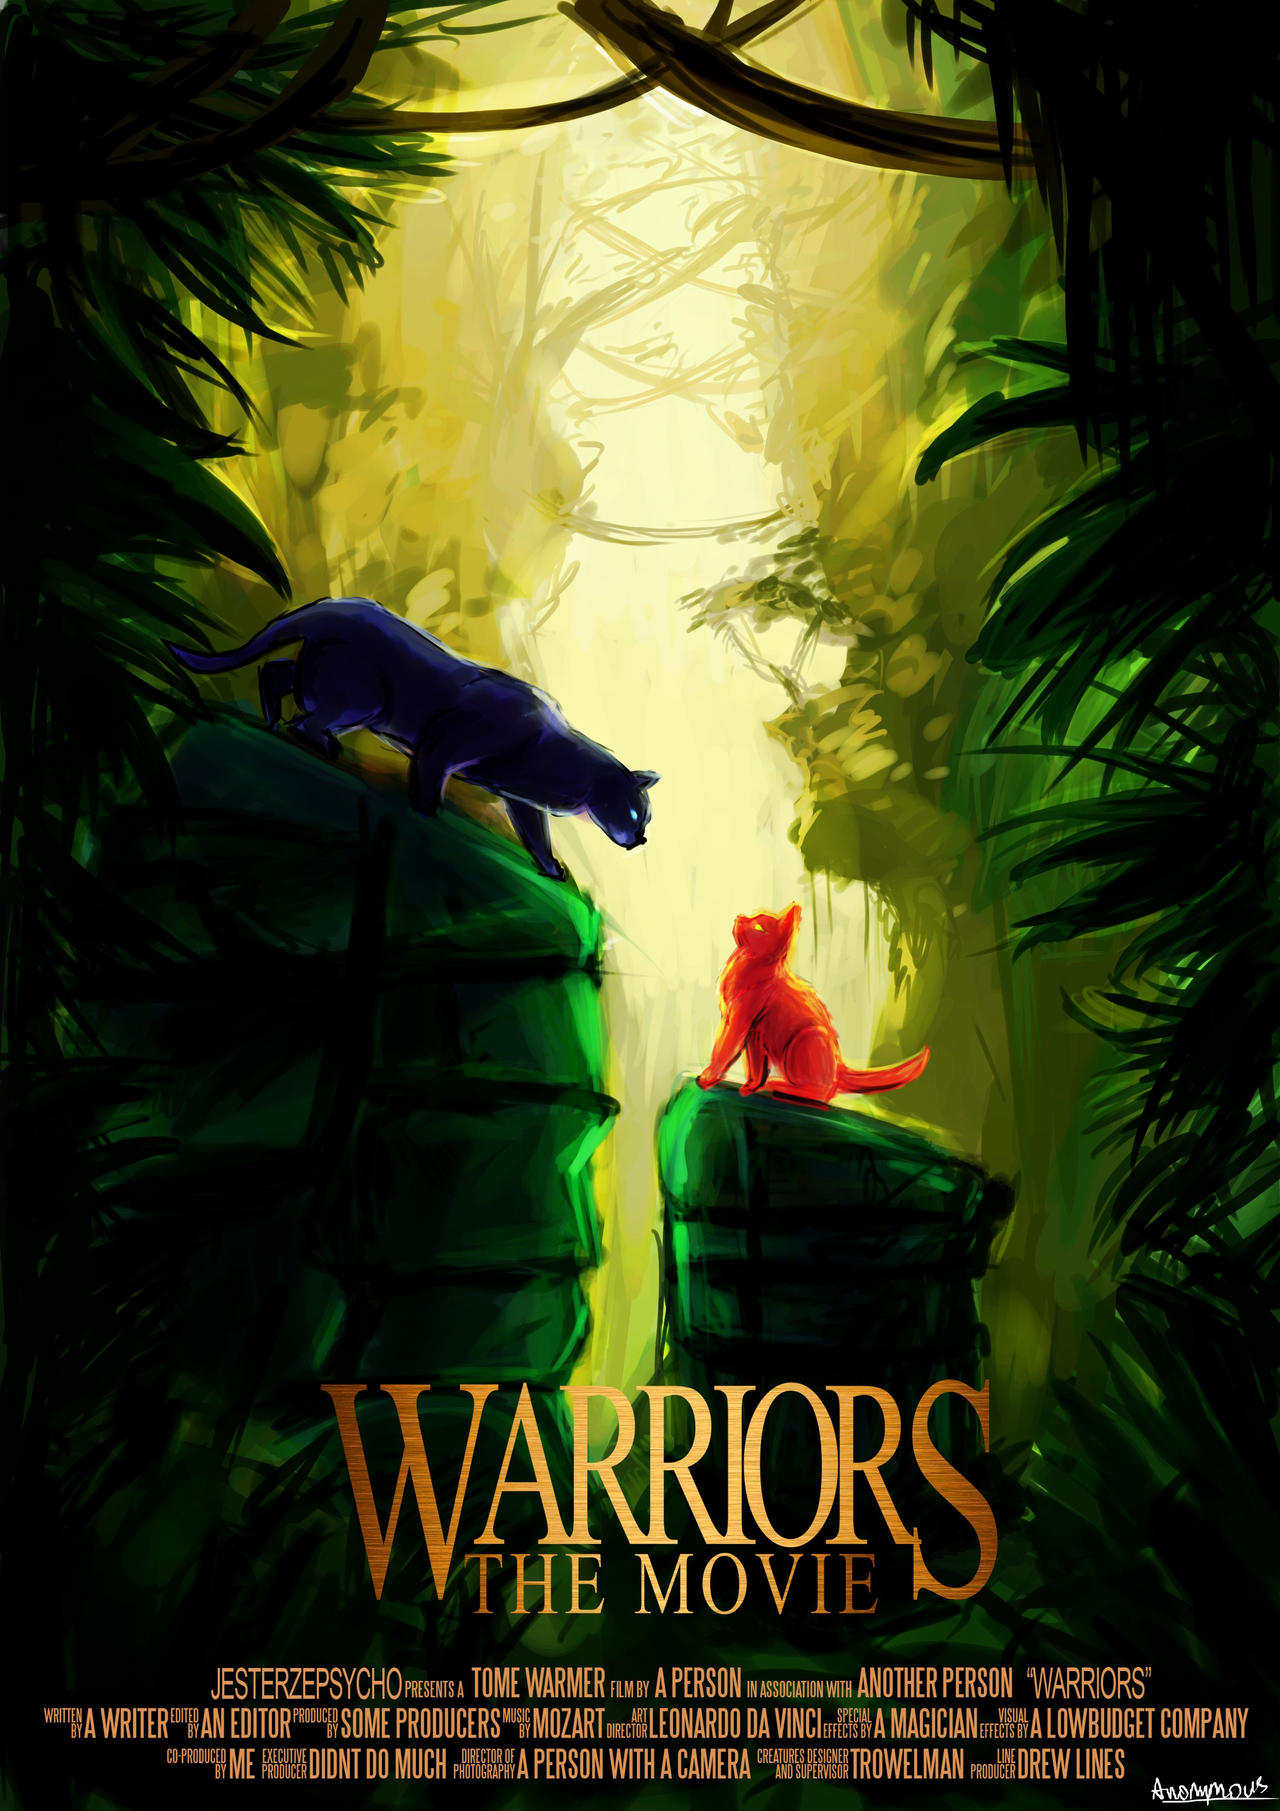 warrior cats (fake) movie poster by entangled-life on DeviantArt